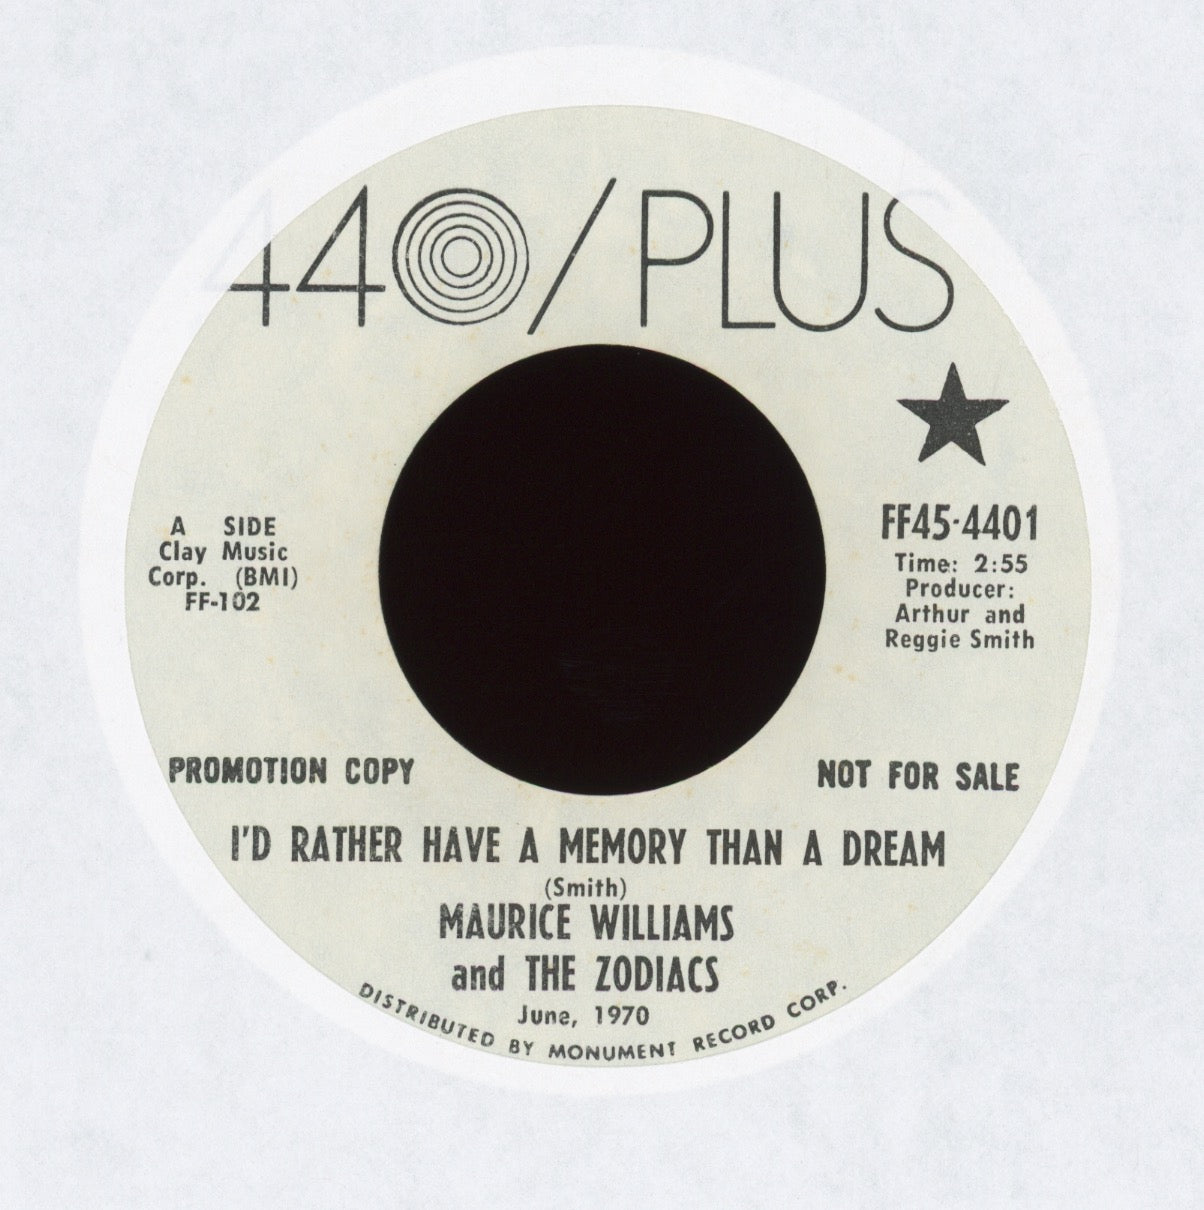 Maurice Williams & The Zodiacs - I’d Rather Have A Memory Than A Dream on 440 Plus Soul Funk 45